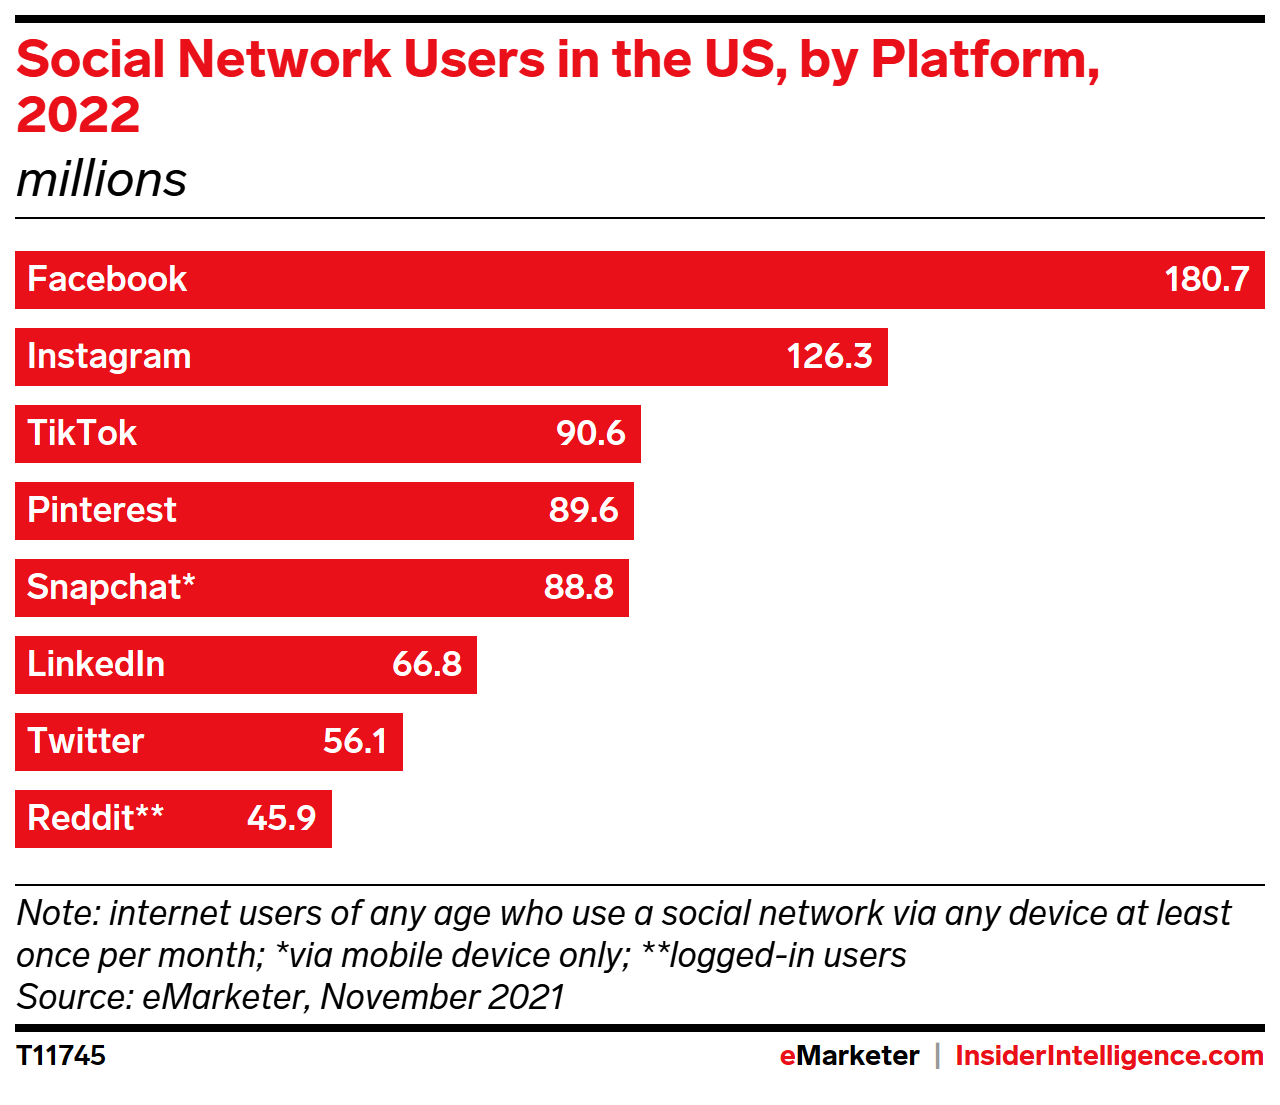 Social Network Users in the US, by Platform, 2022 (millions)